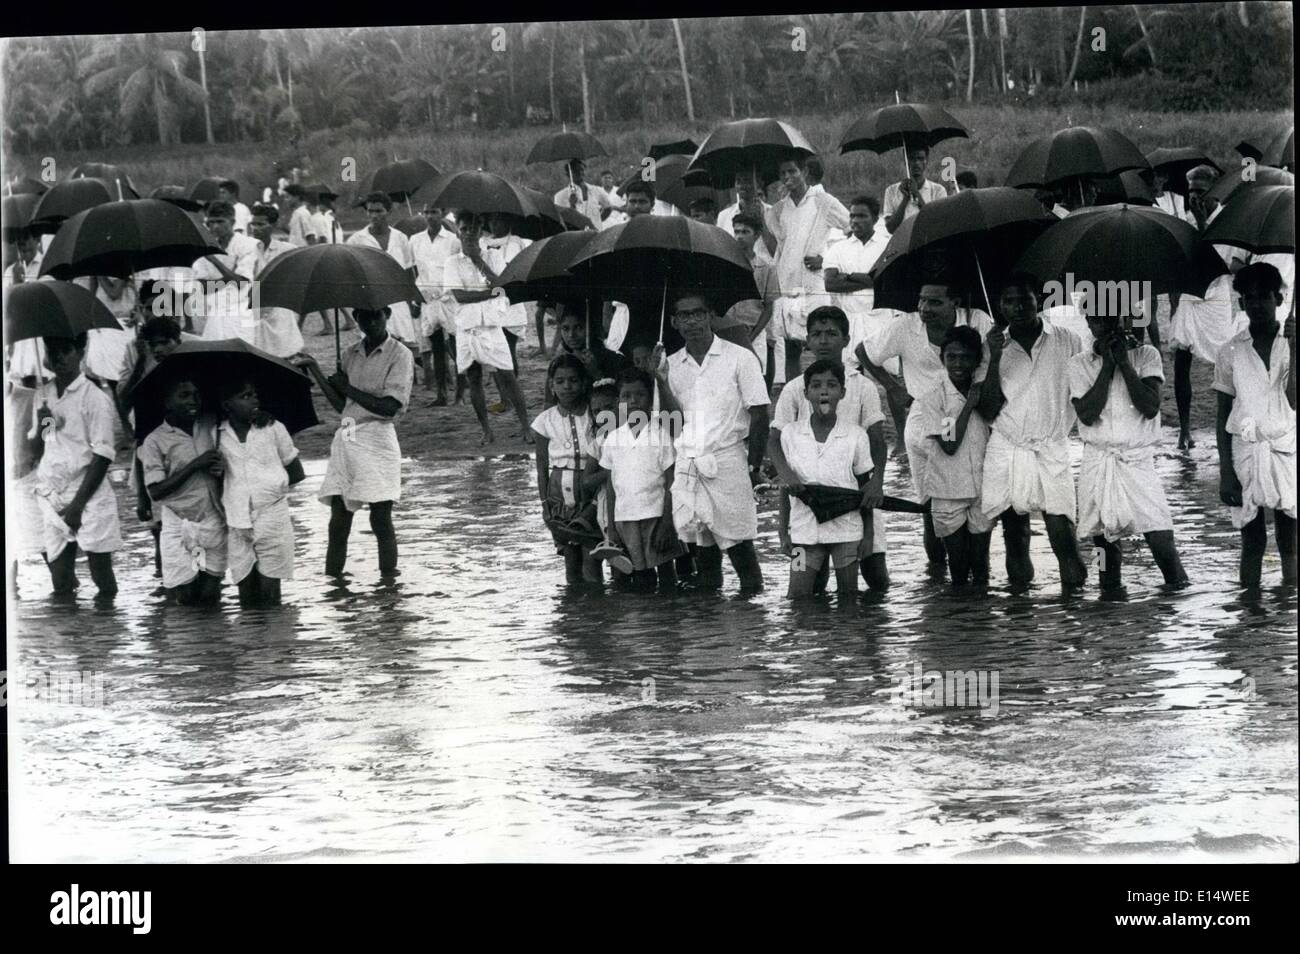 Apr. 18, 2012 - Harvest Festivl in the land of Kerala Celebrates on water. Villagers of the area now wear a mixture of western and local attire, but carry umbrellas to keep their heads dry but don't worry about the river water washing their feet as they watch the Aranmula Boat Festival in Kerals Stock Photo